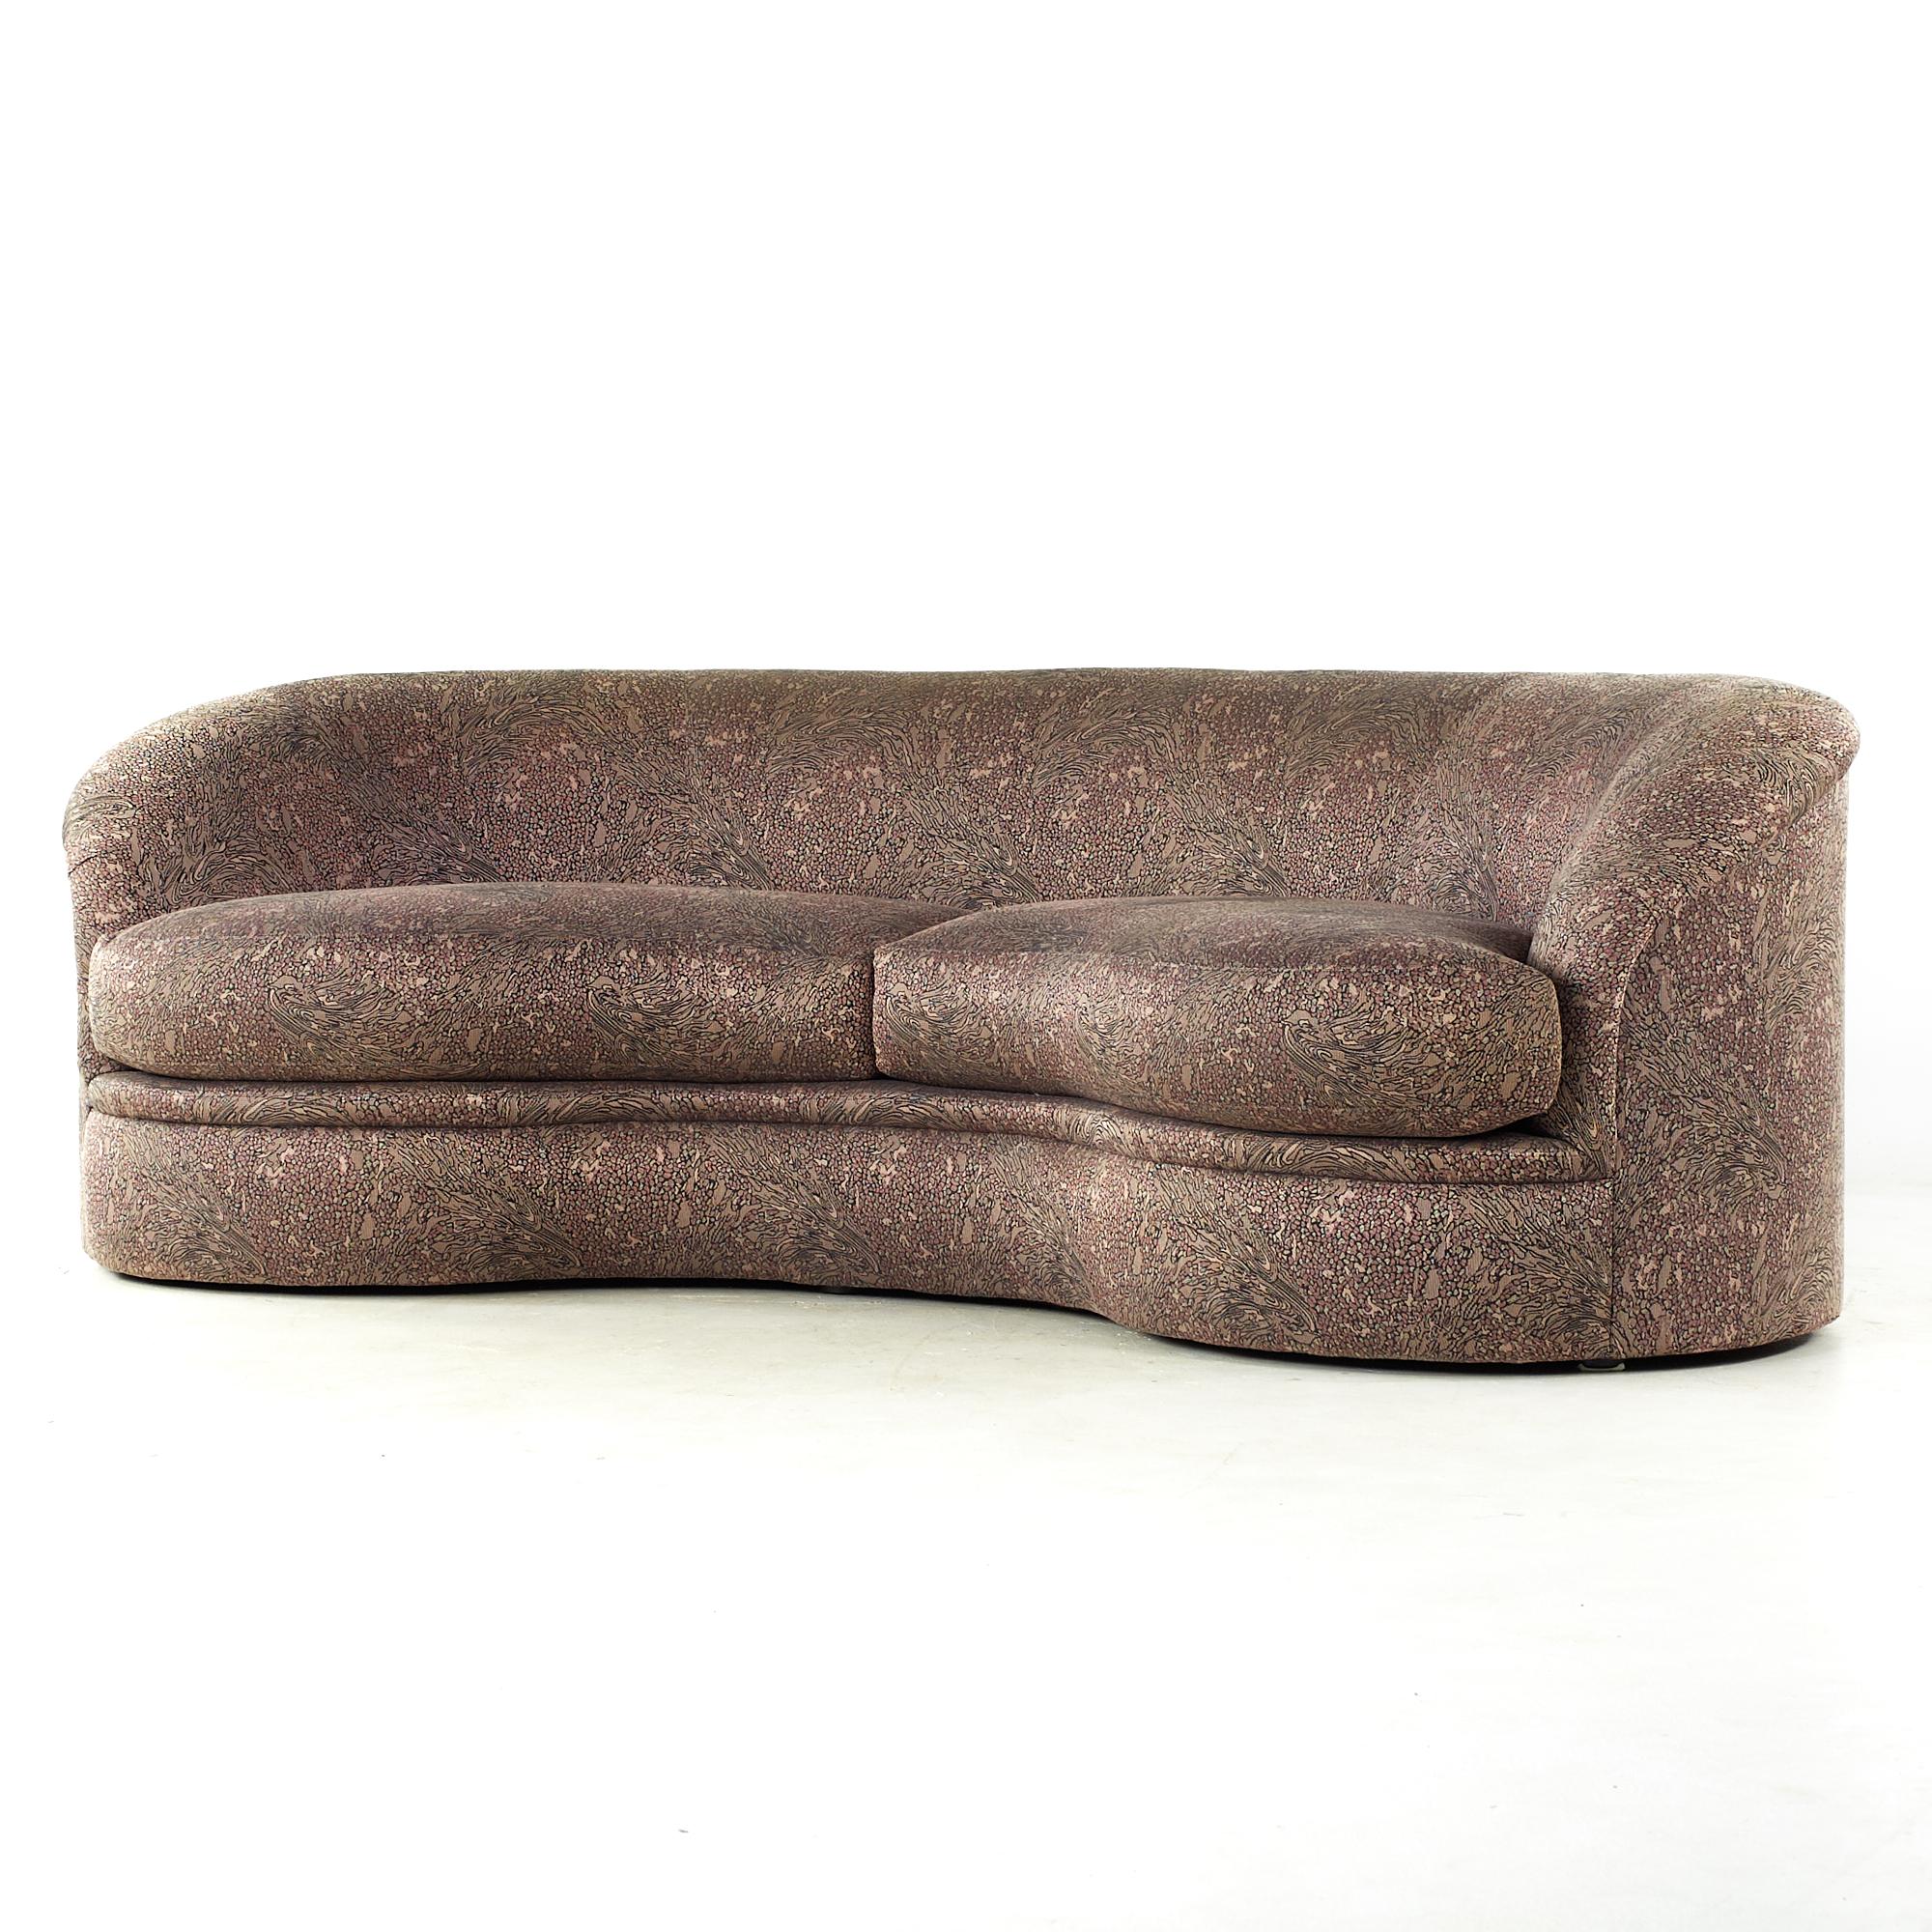 American Kagan for Directional Mid Century Kidney Sofa For Sale